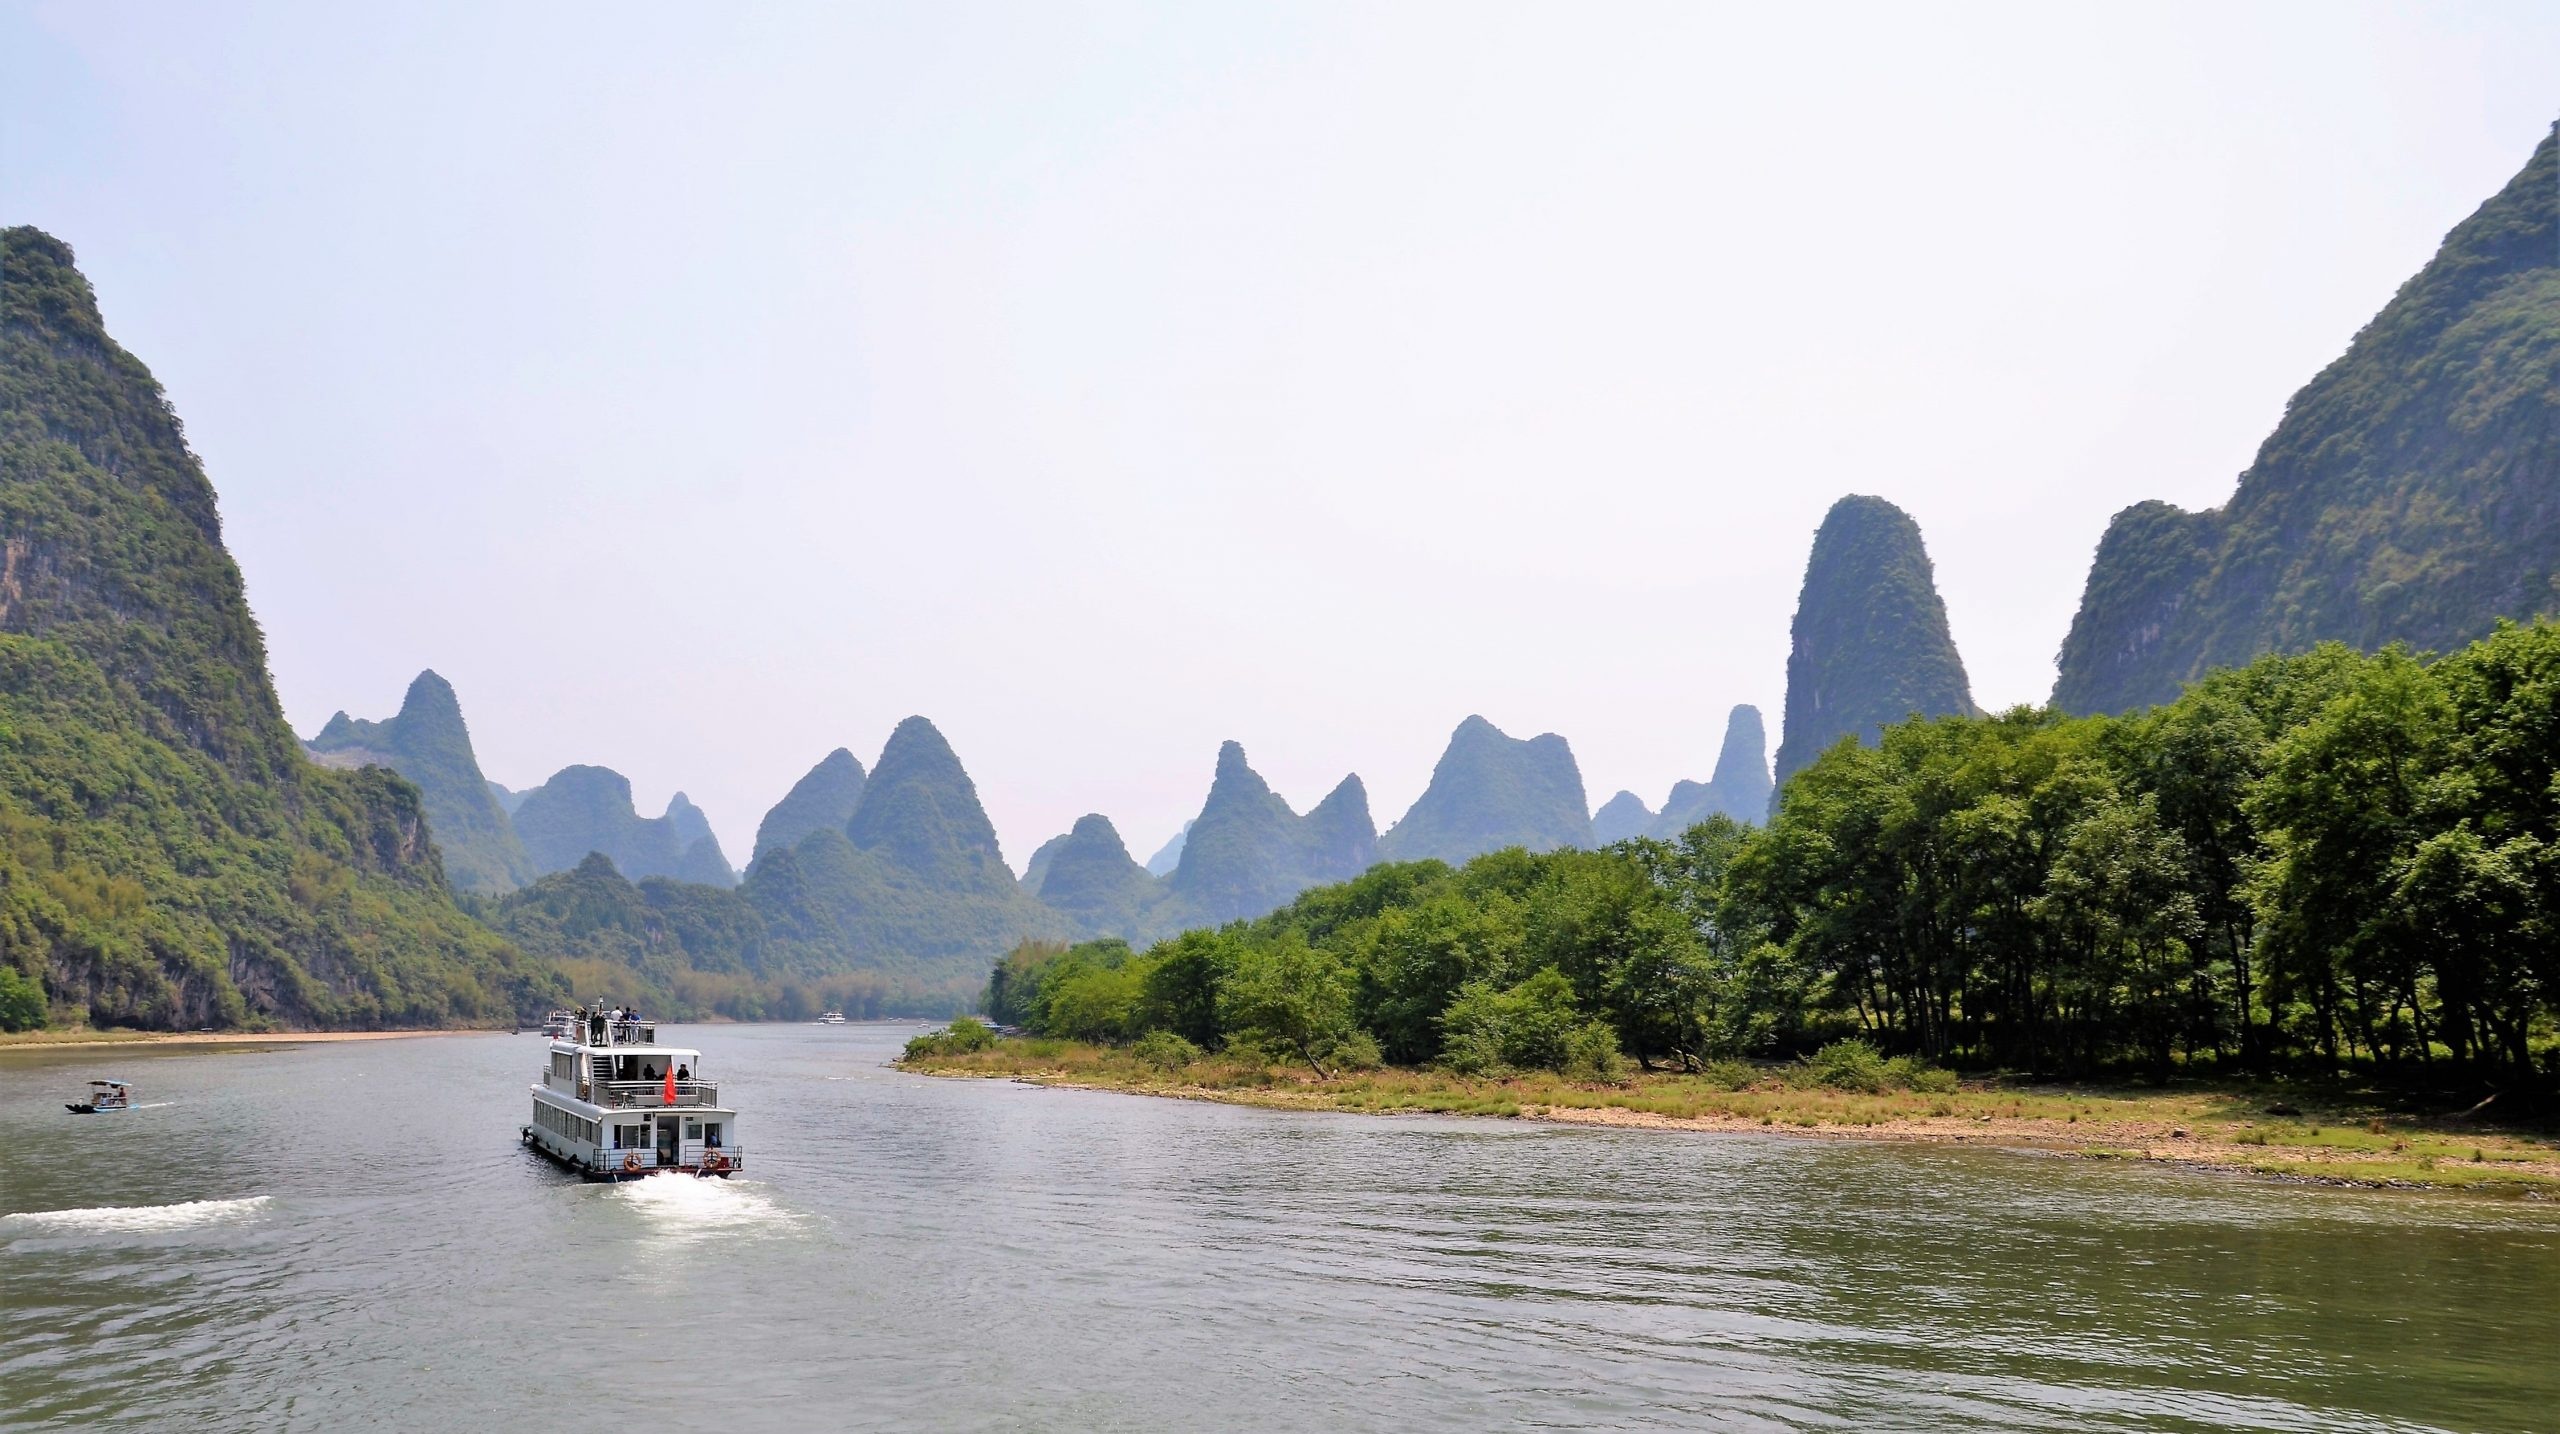 Li River Guilin, Guilin attractions, Travel tips, Chinese beauty, 2560x1440 HD Desktop